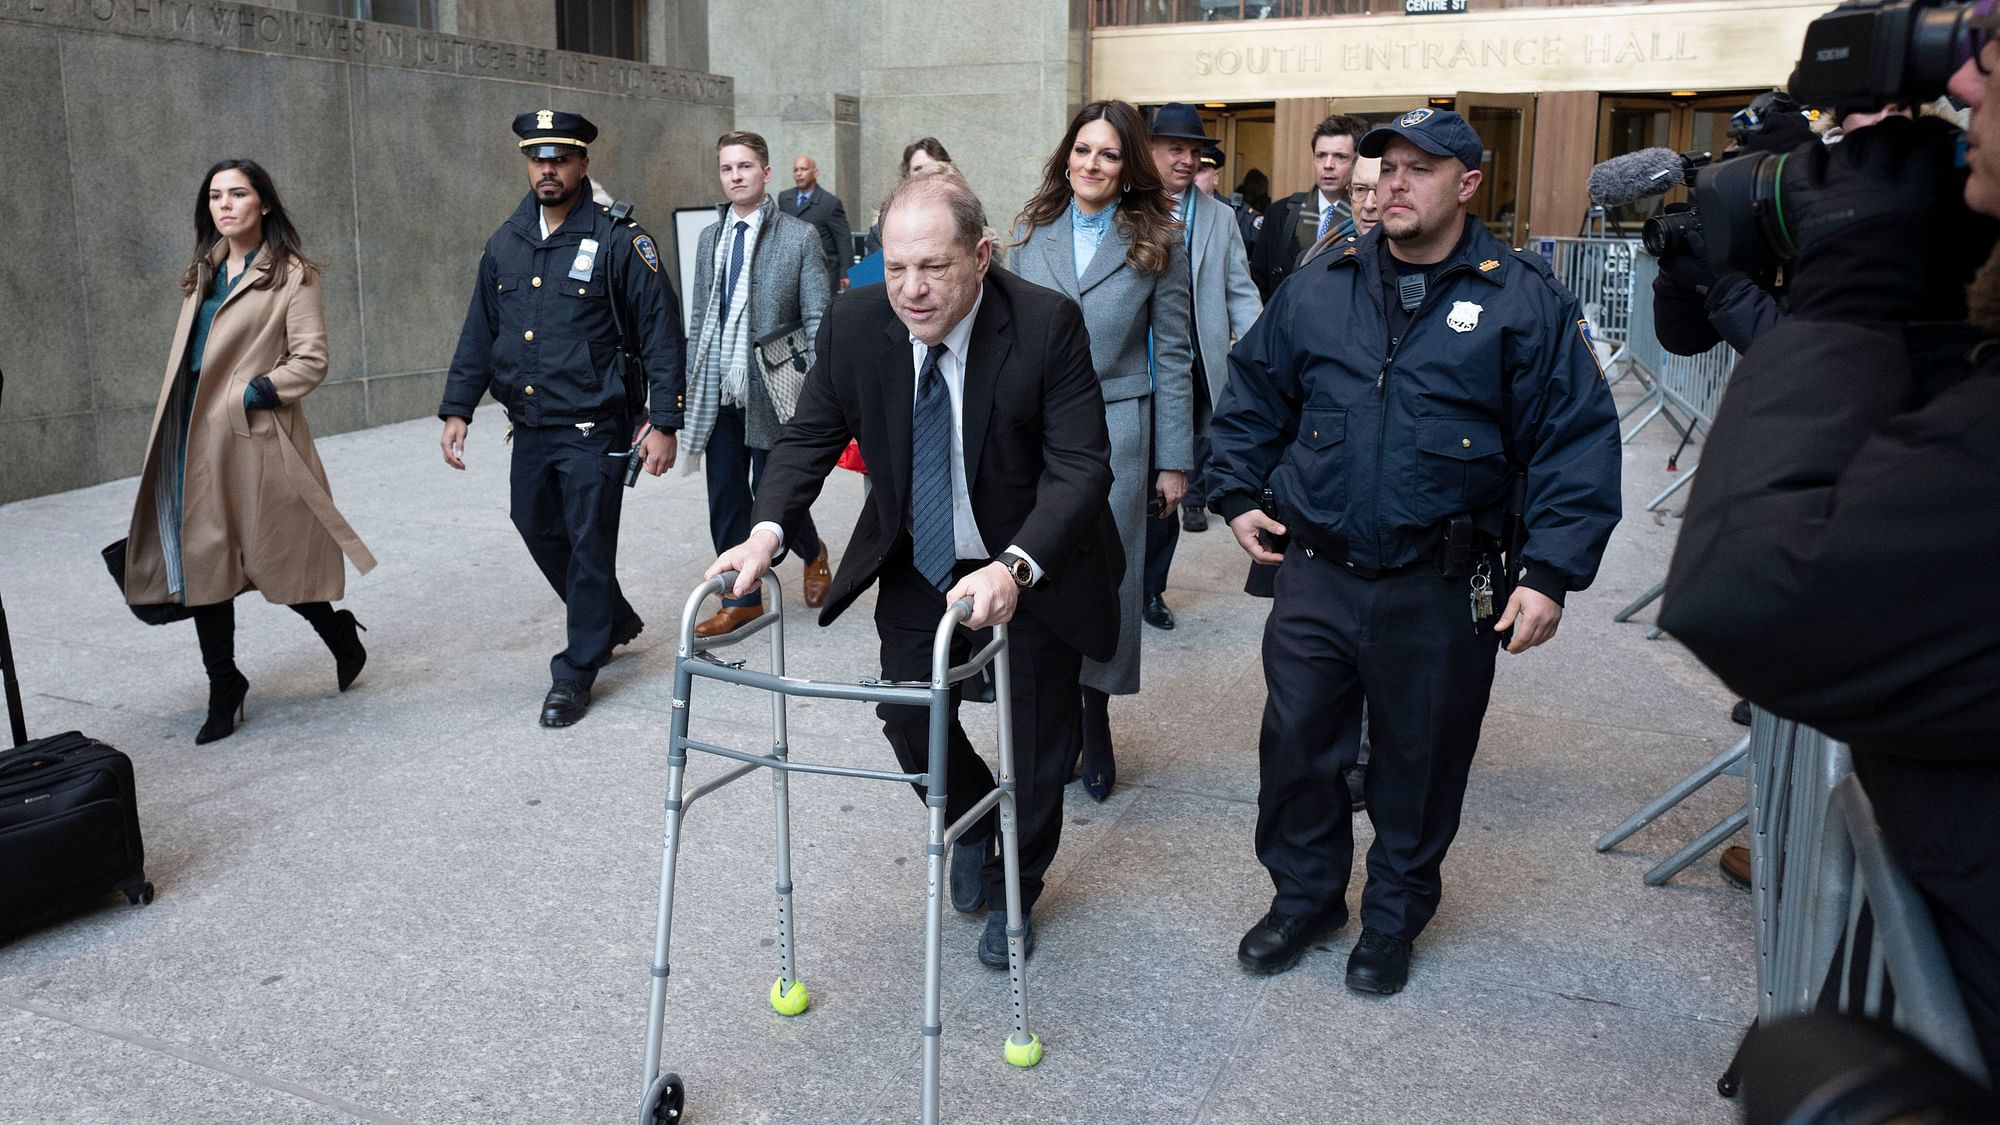 Harvey Weinstein leaves a Manhattan courthouse following a day in his trial on rape and sexual assault charges.